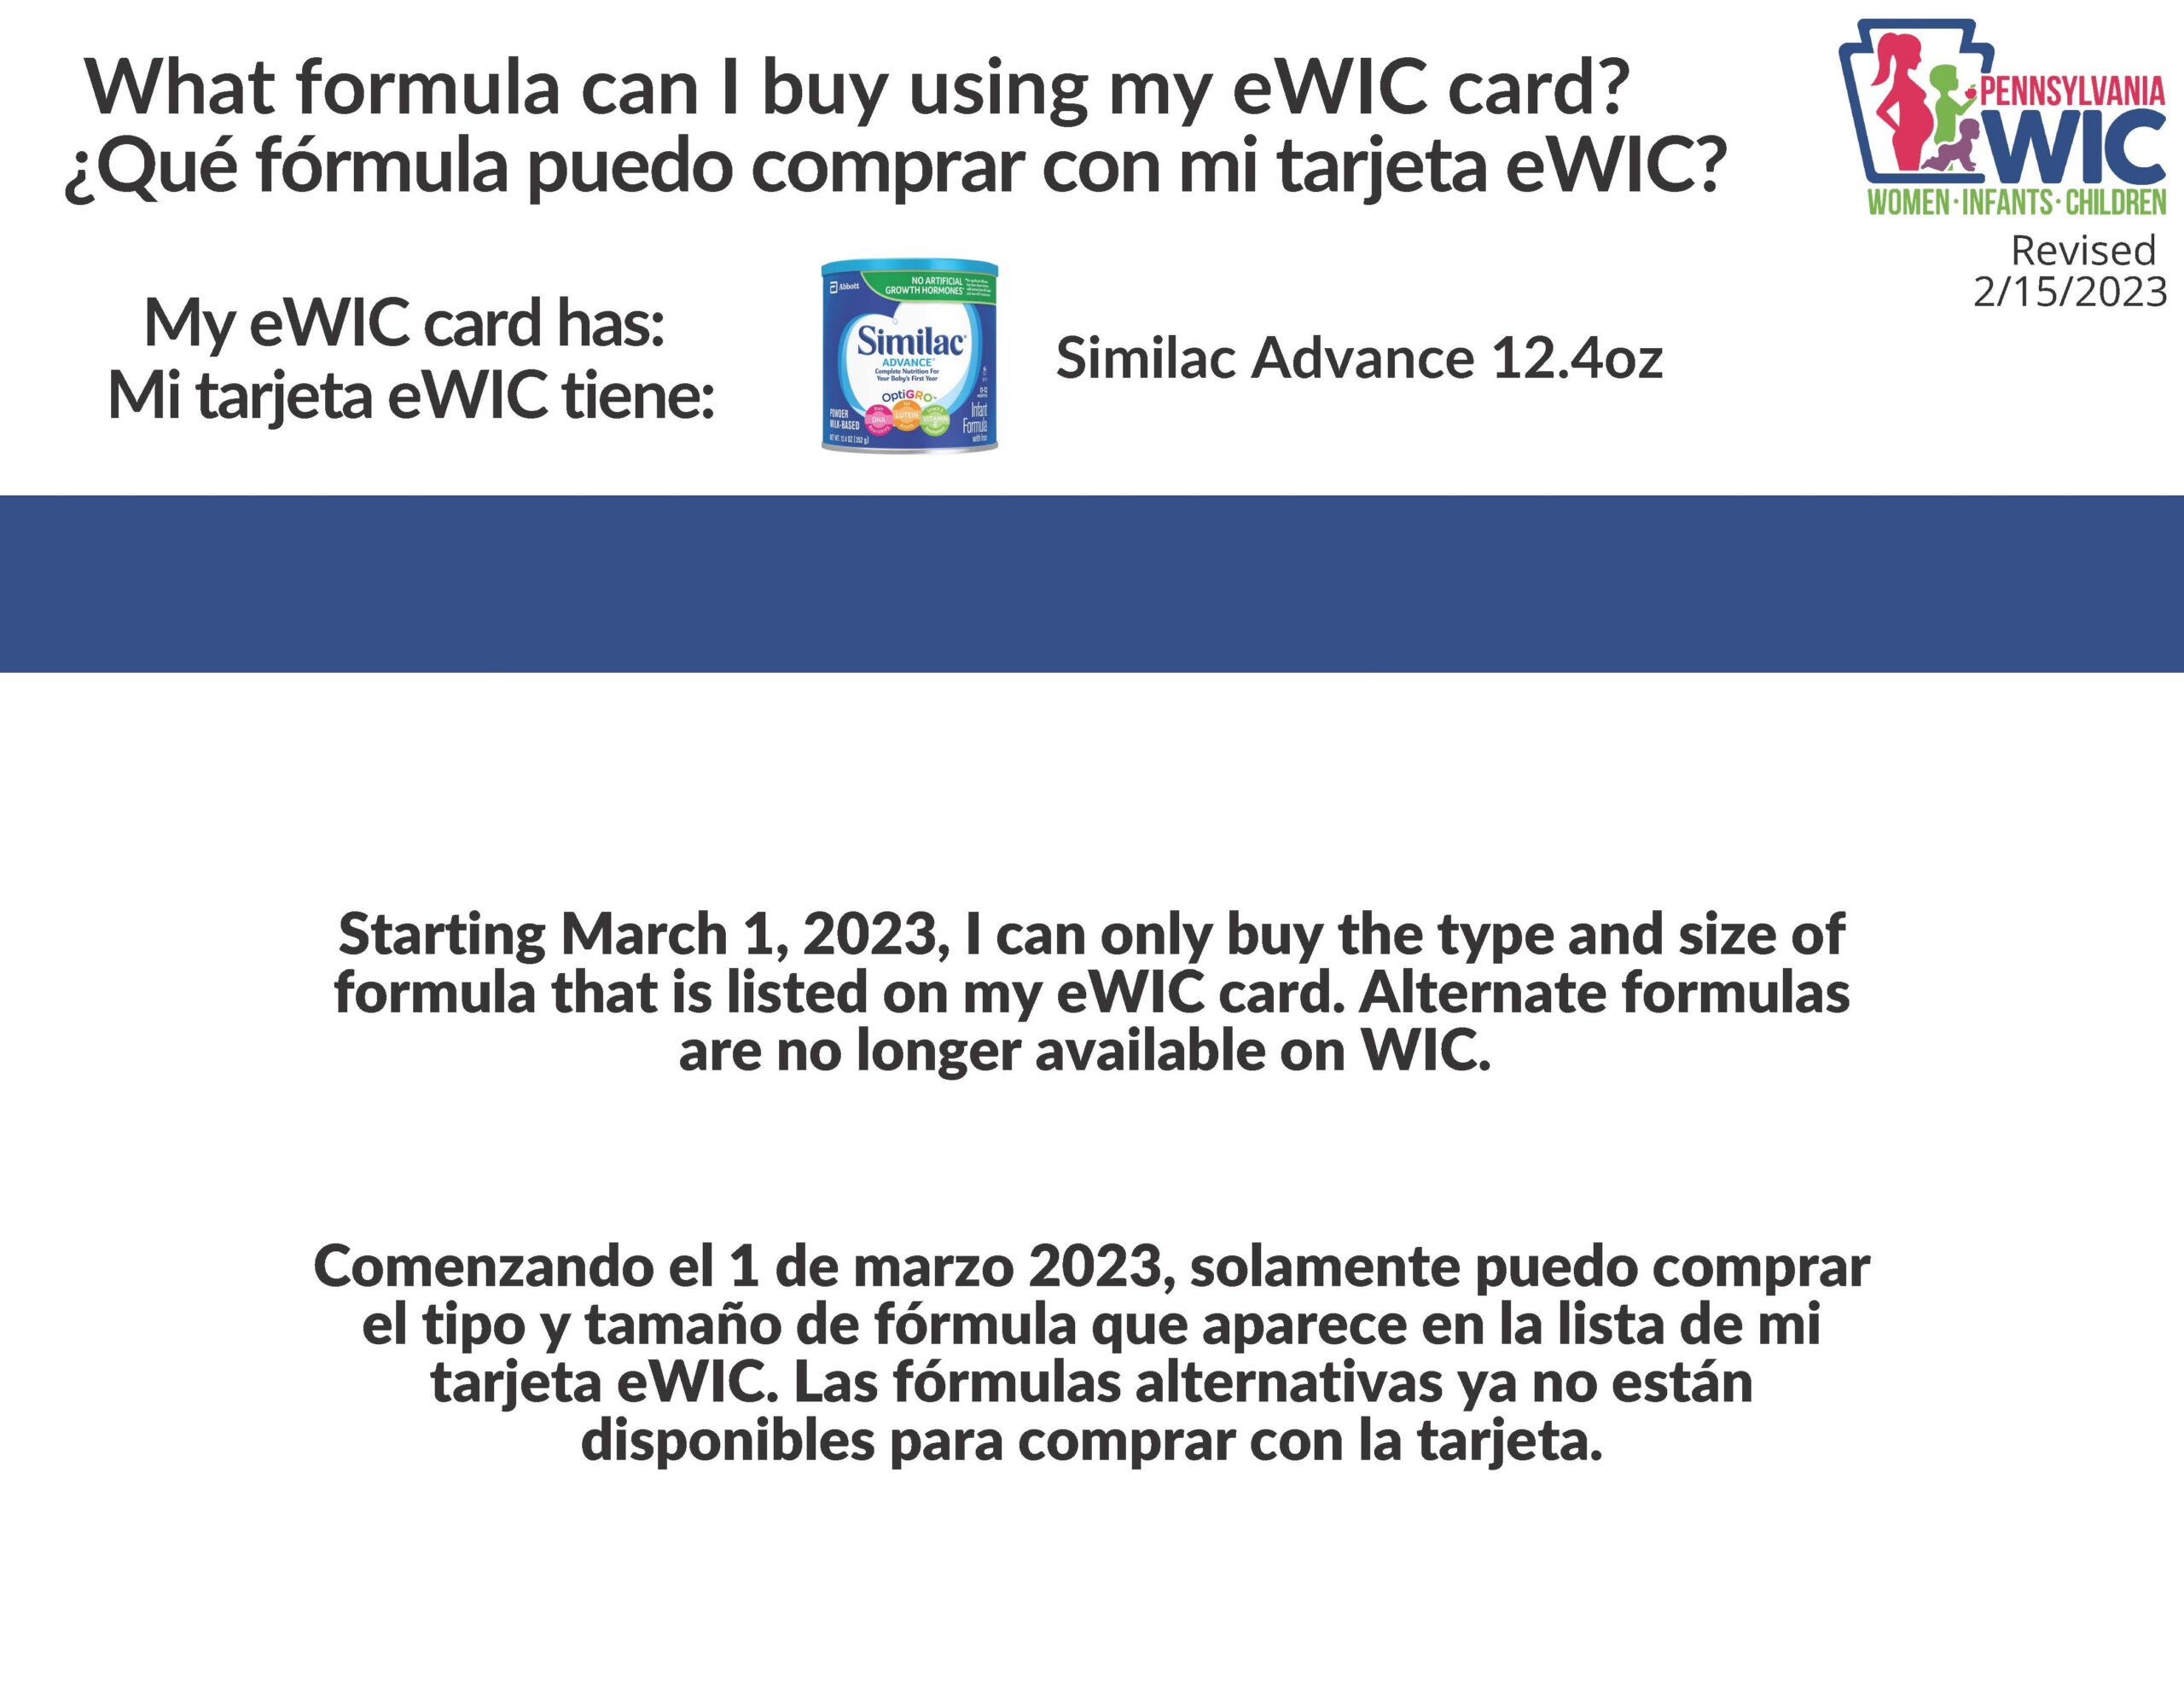 https://www.mfhs.org/wp-content/uploads/2023/02/PA-WIC-Letter-to-Providers-re-Formula-Options-2.23.23_Page_02-scaled.jpg